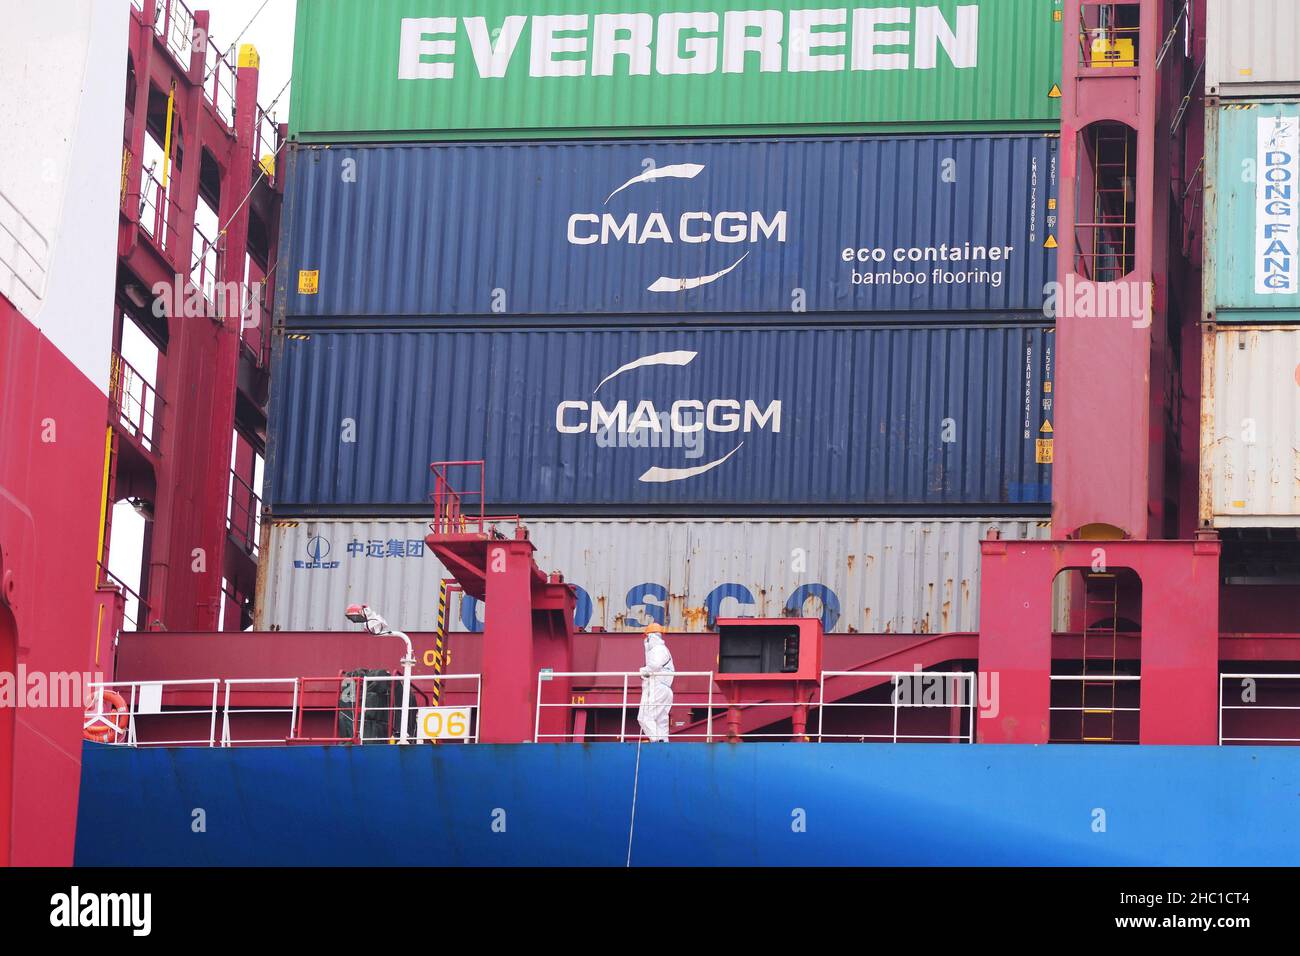 QINGDAO, CHINA - DECEMBER 23, 2021 - A crew member walks on board the China Ocean Global Ship at the Foreign trade container terminal at Qingdao Port Stock Photo